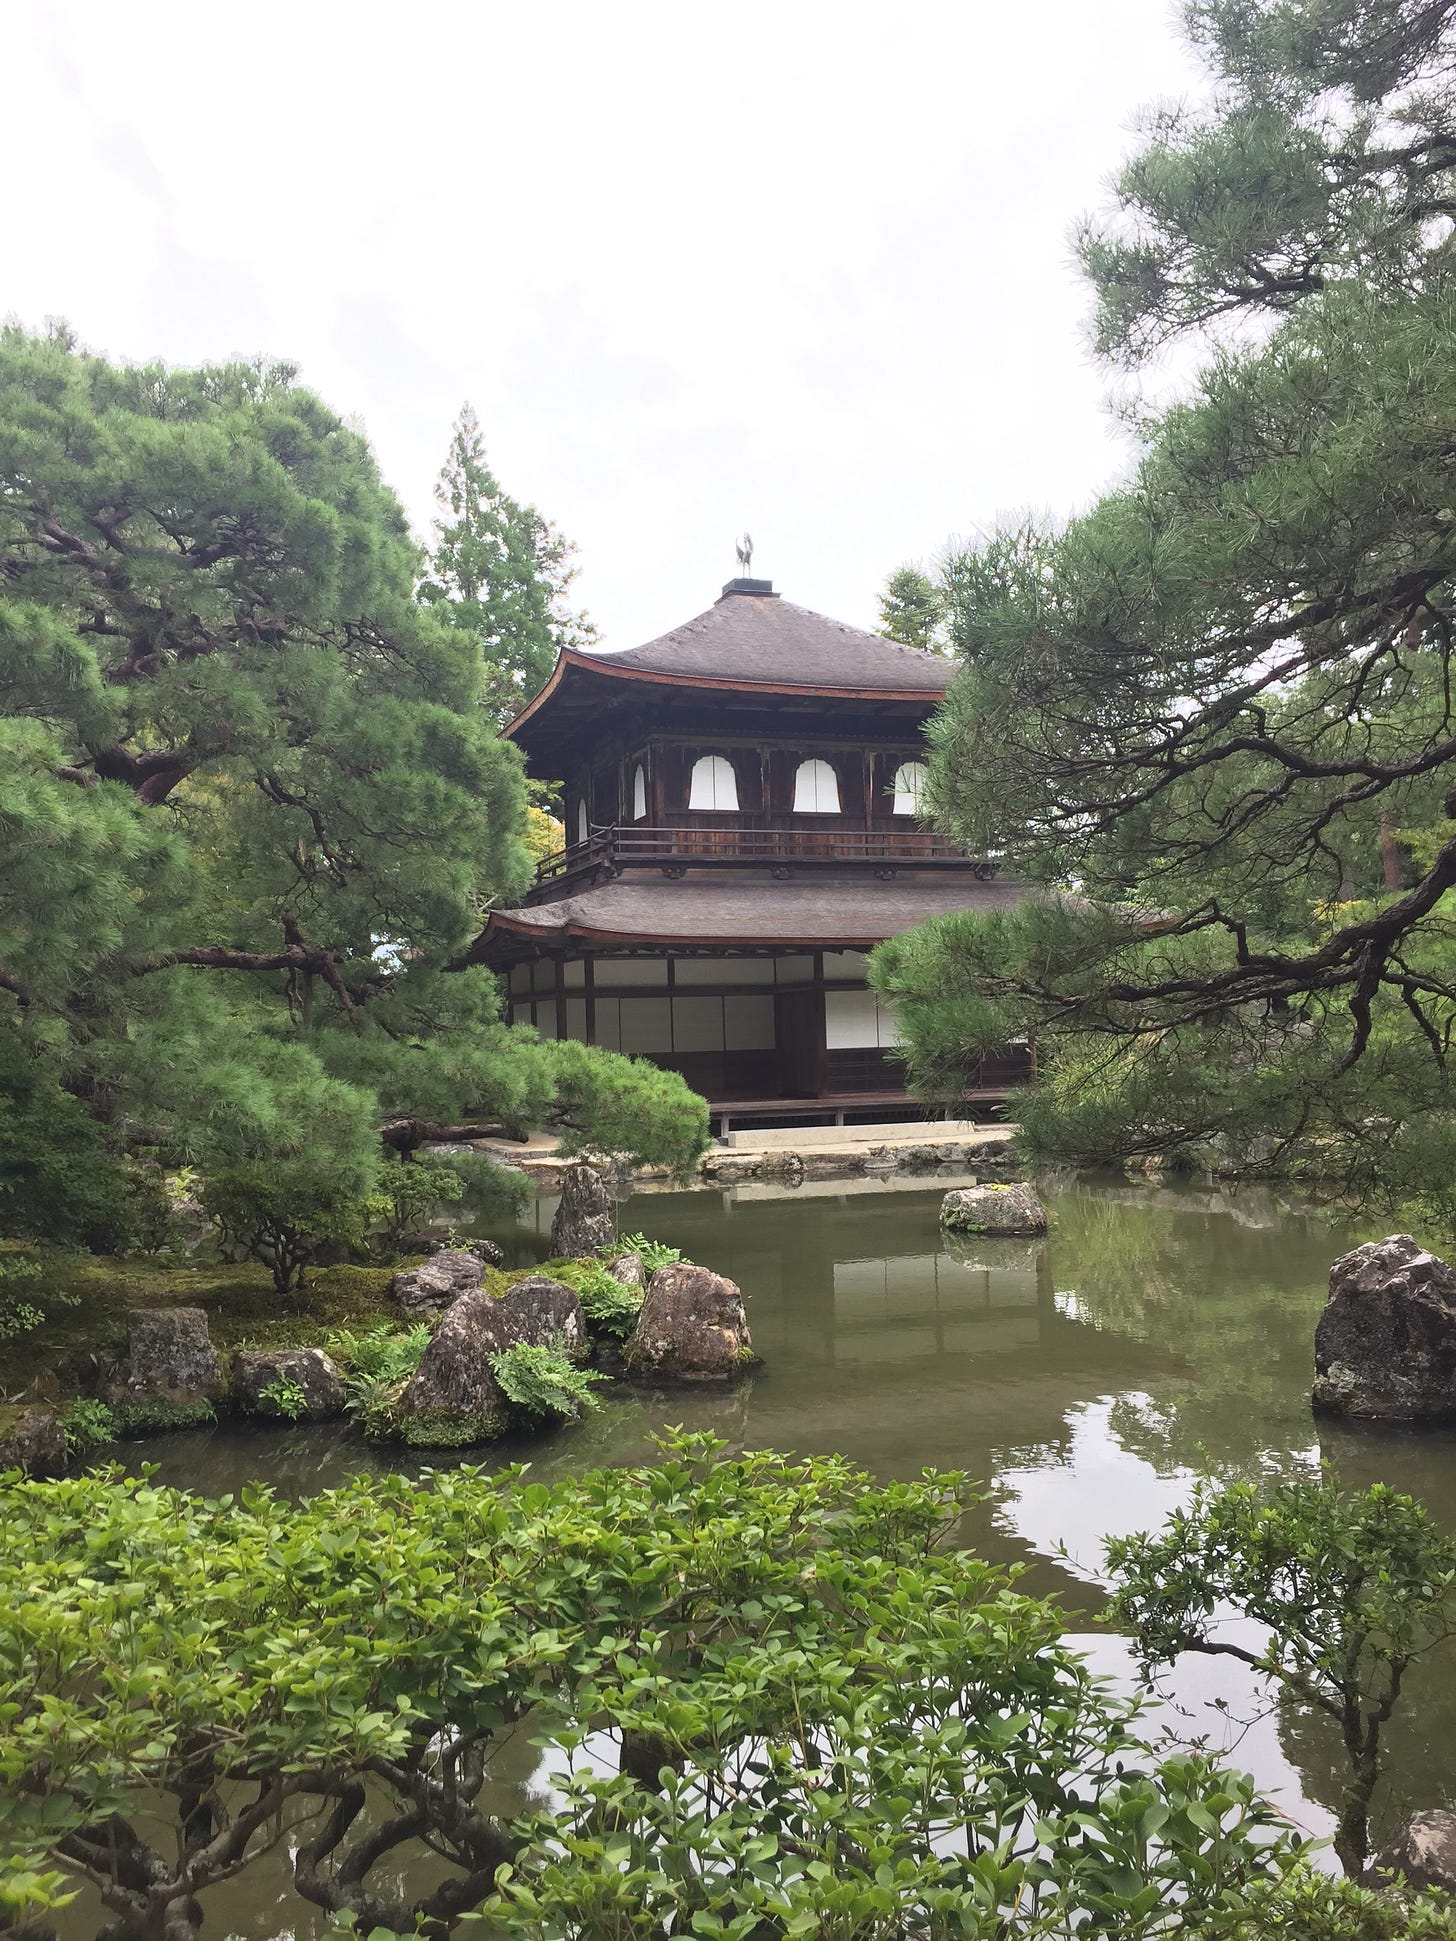 A two-storey wooden temple, surrounded by trees, is viewed from across a large pond with feature stones.